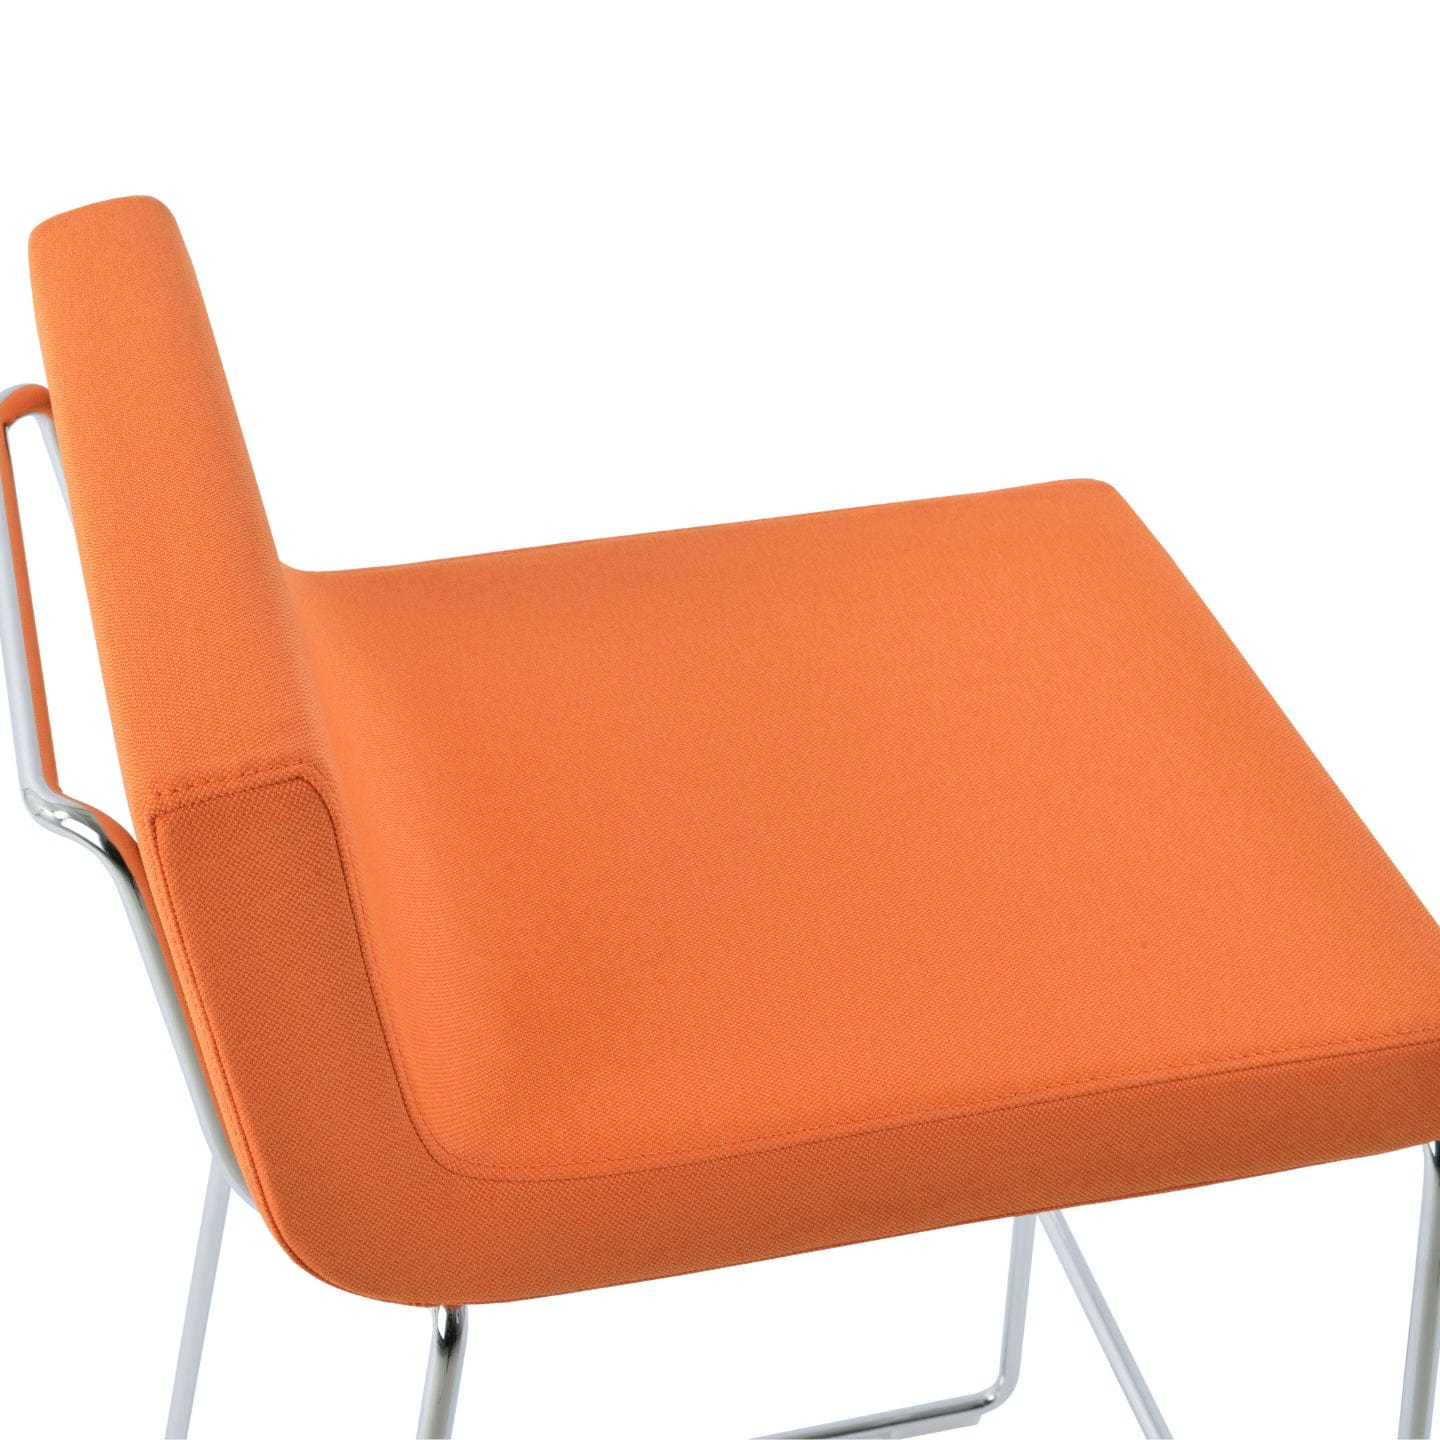 Soho Concept dallas-wire-handle-back-metal-wire-base-leatherette-seat-kitchen-stool-in-orange